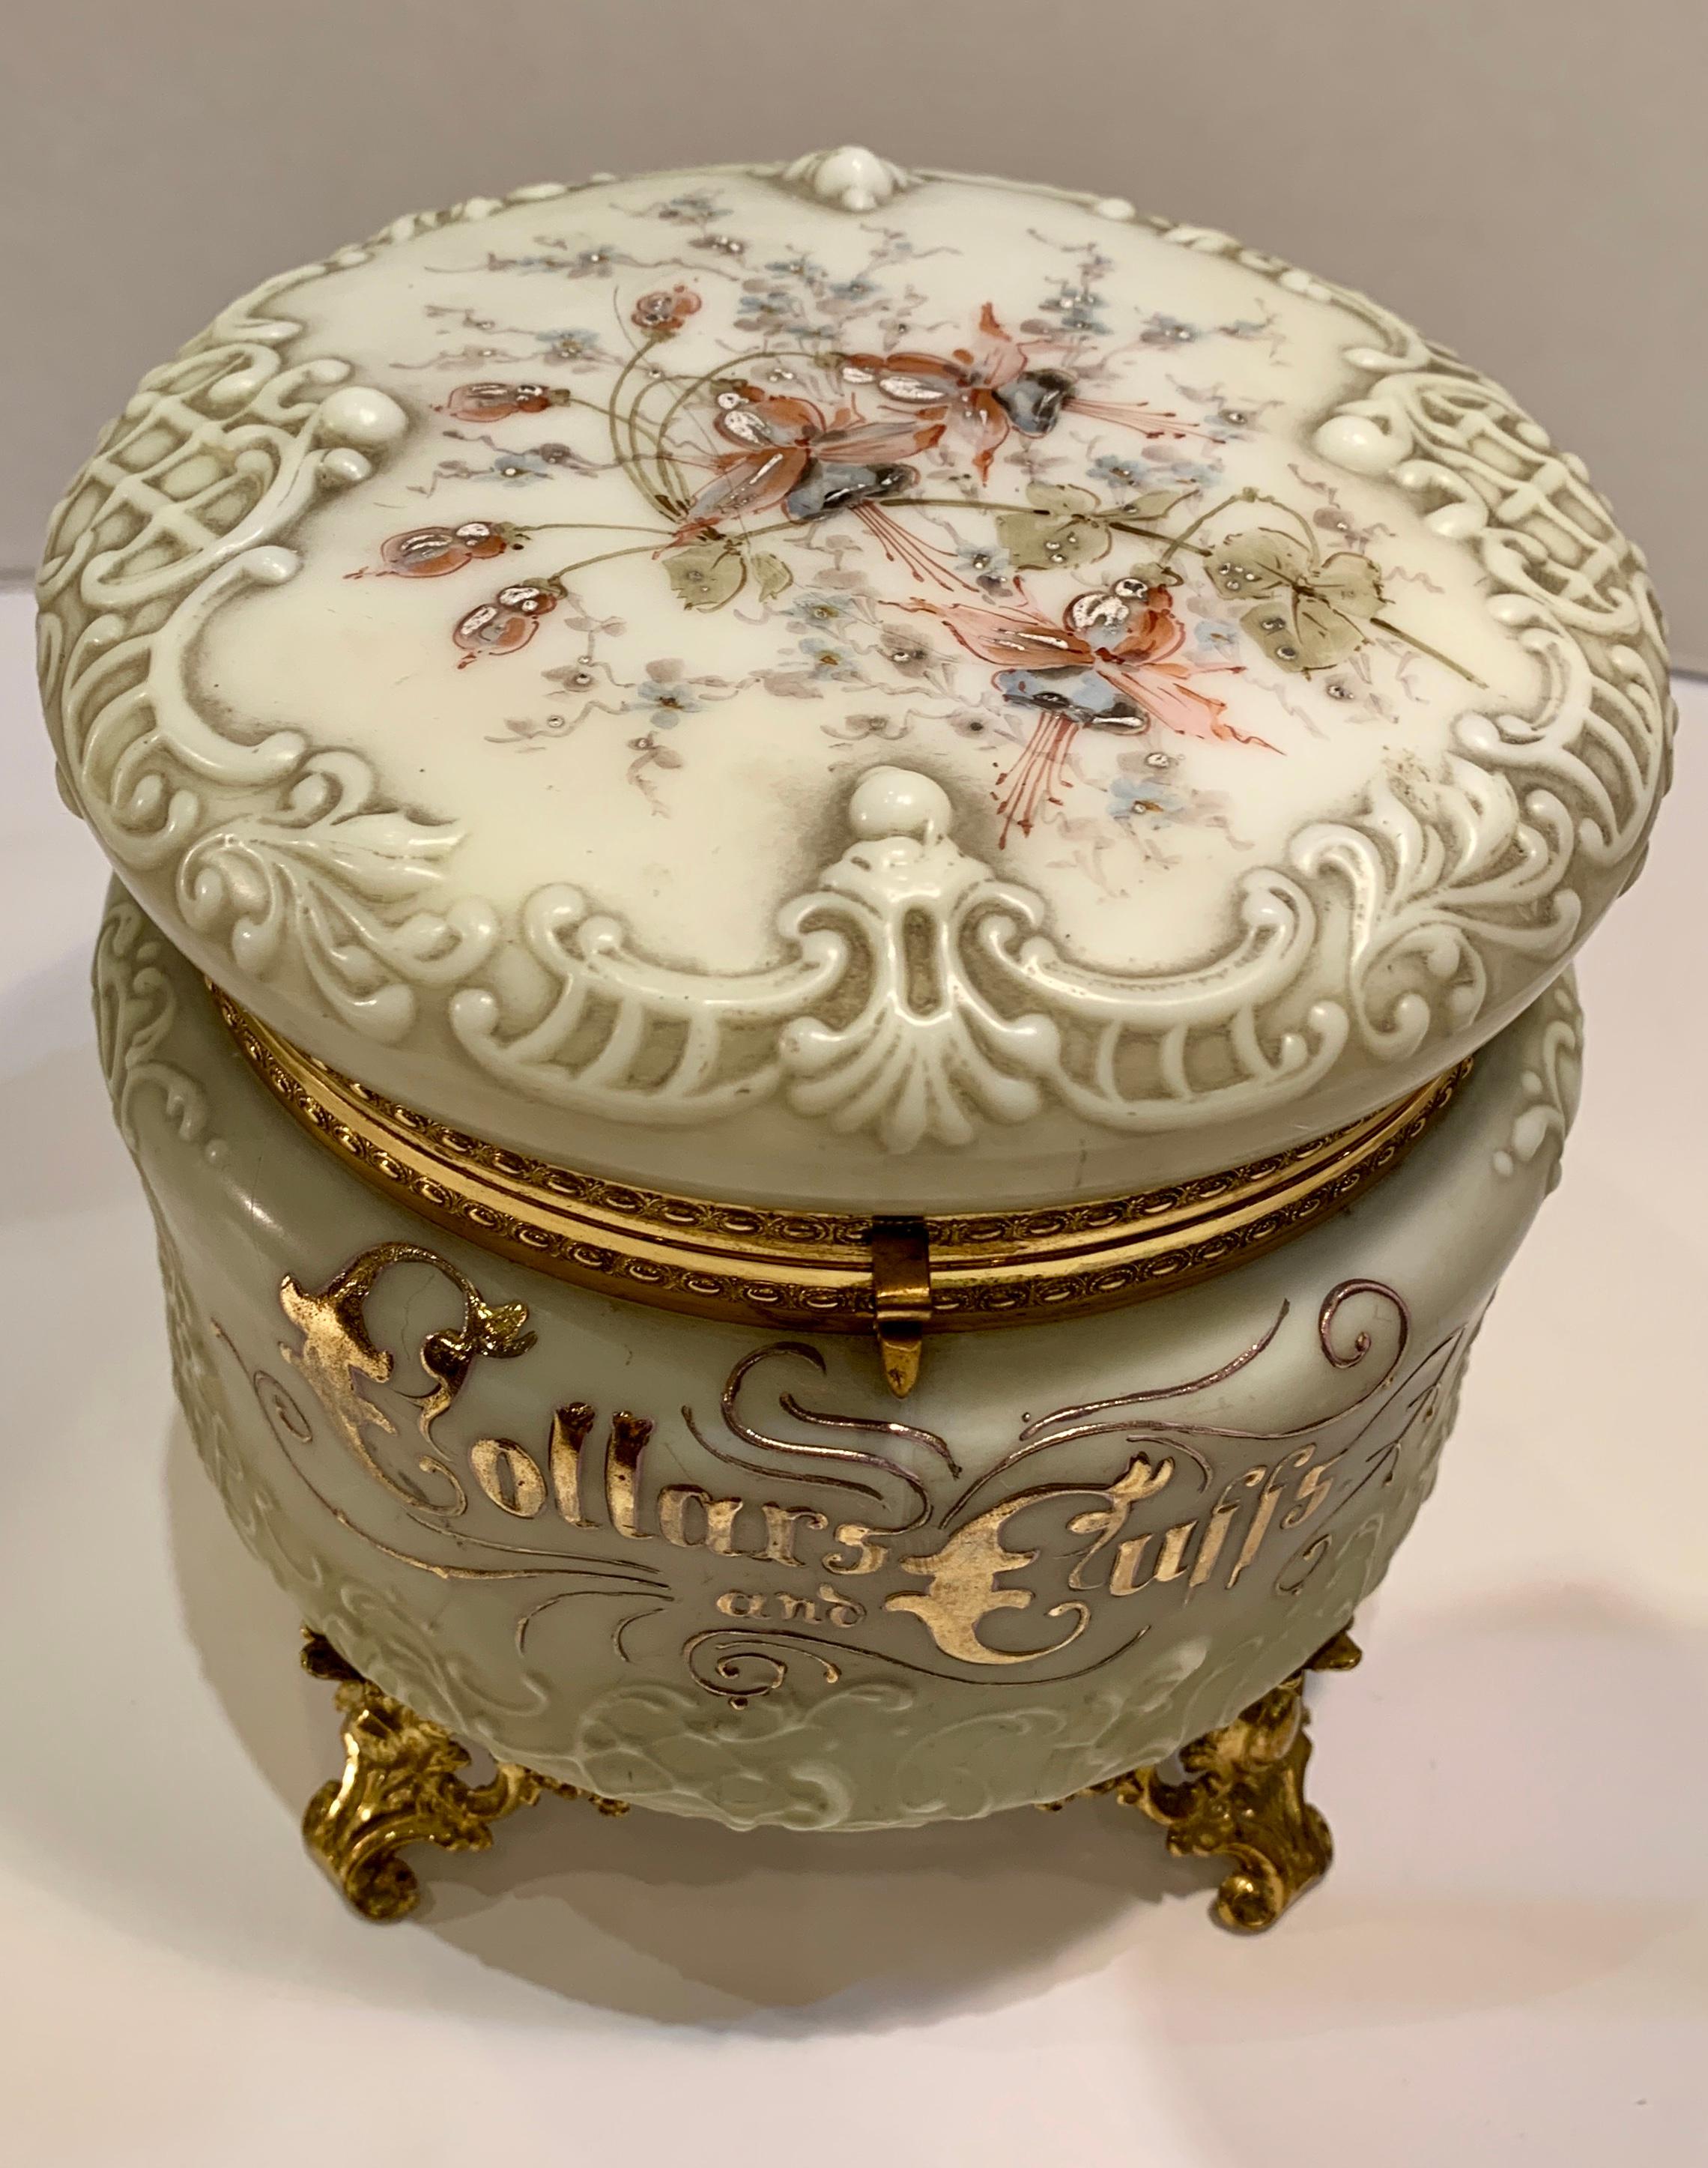 Ornate Victorian, molded high relief opalware glass round box with hinged lid features “Collars and Cuffs” hand painted in raised 24-karat gold on the front and a beaded, raised enamel pastel floral motif on the lid. Box has egg and dart pattern